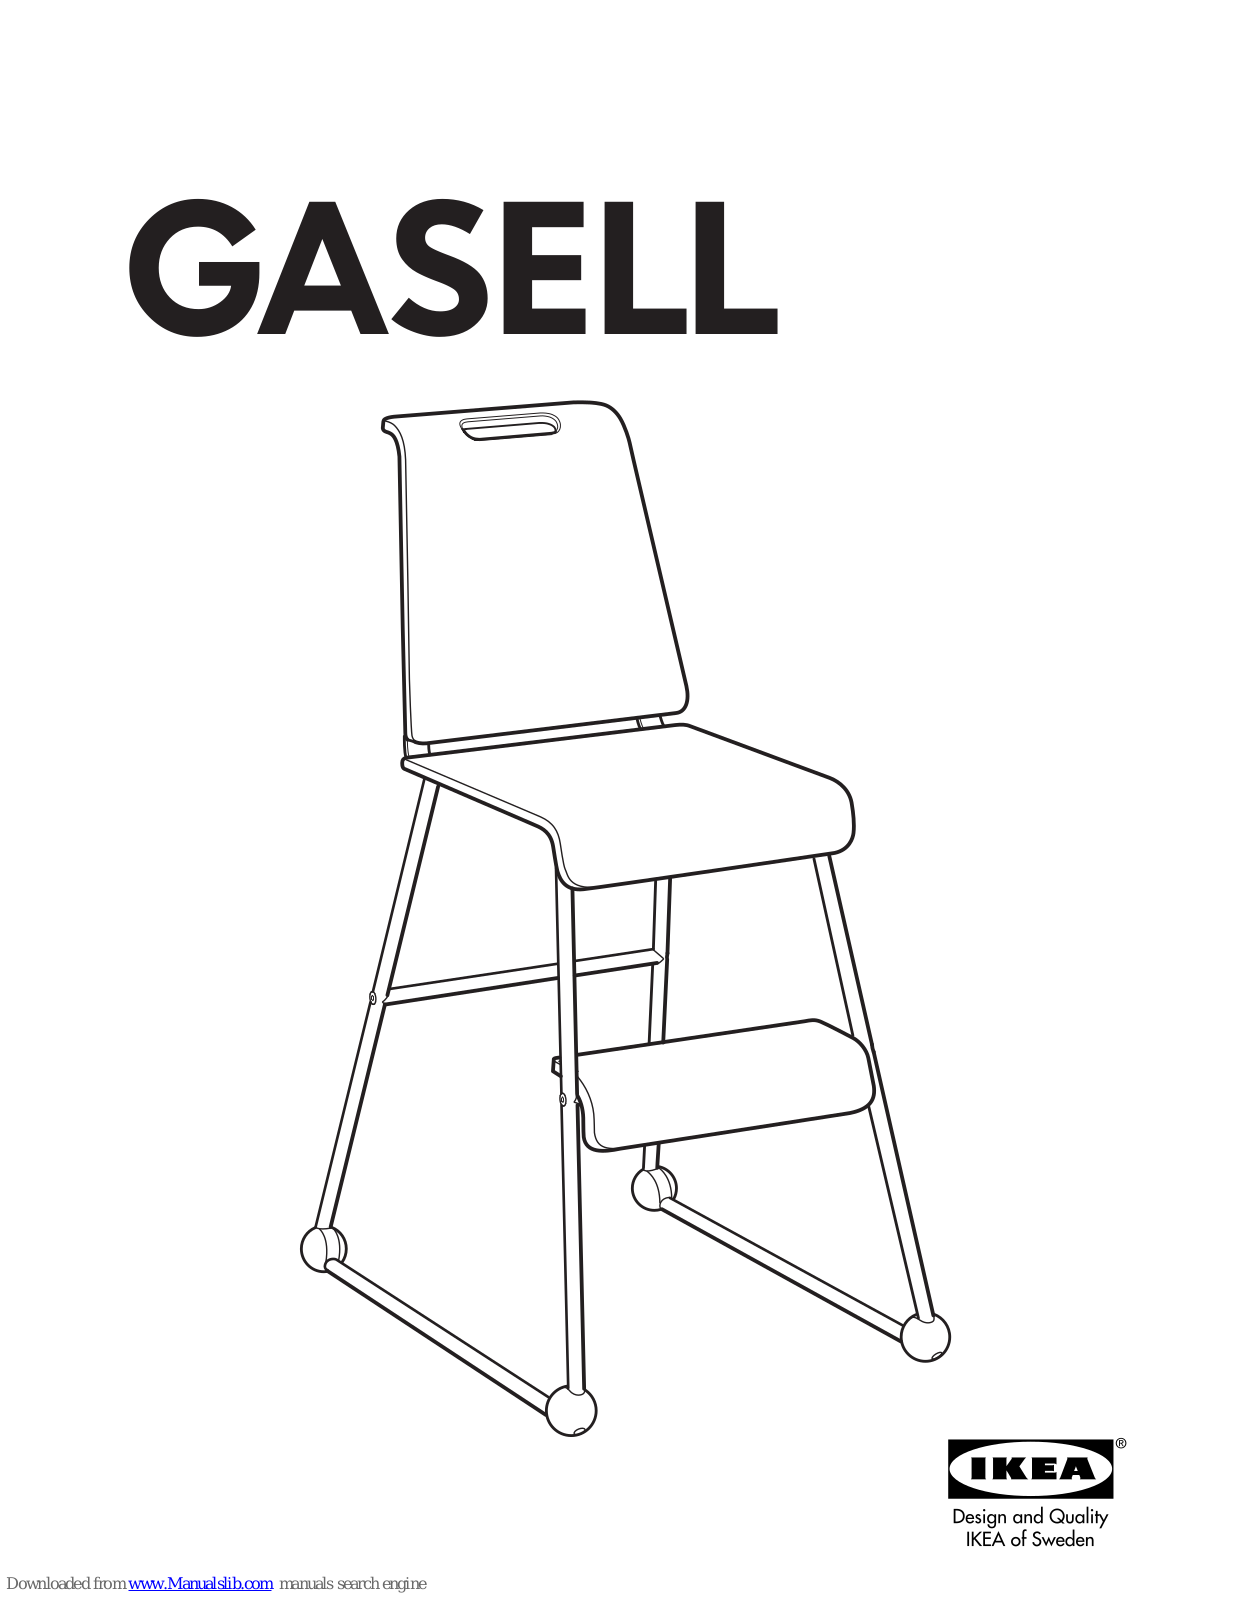 IKEA GASELL AA-93921-4, EXPEDIT CASTORS, BEDDINGE SOFA BED COVER, BERNHARD CHAIR, GILBERT CHAIR Assembly Instructions Manual